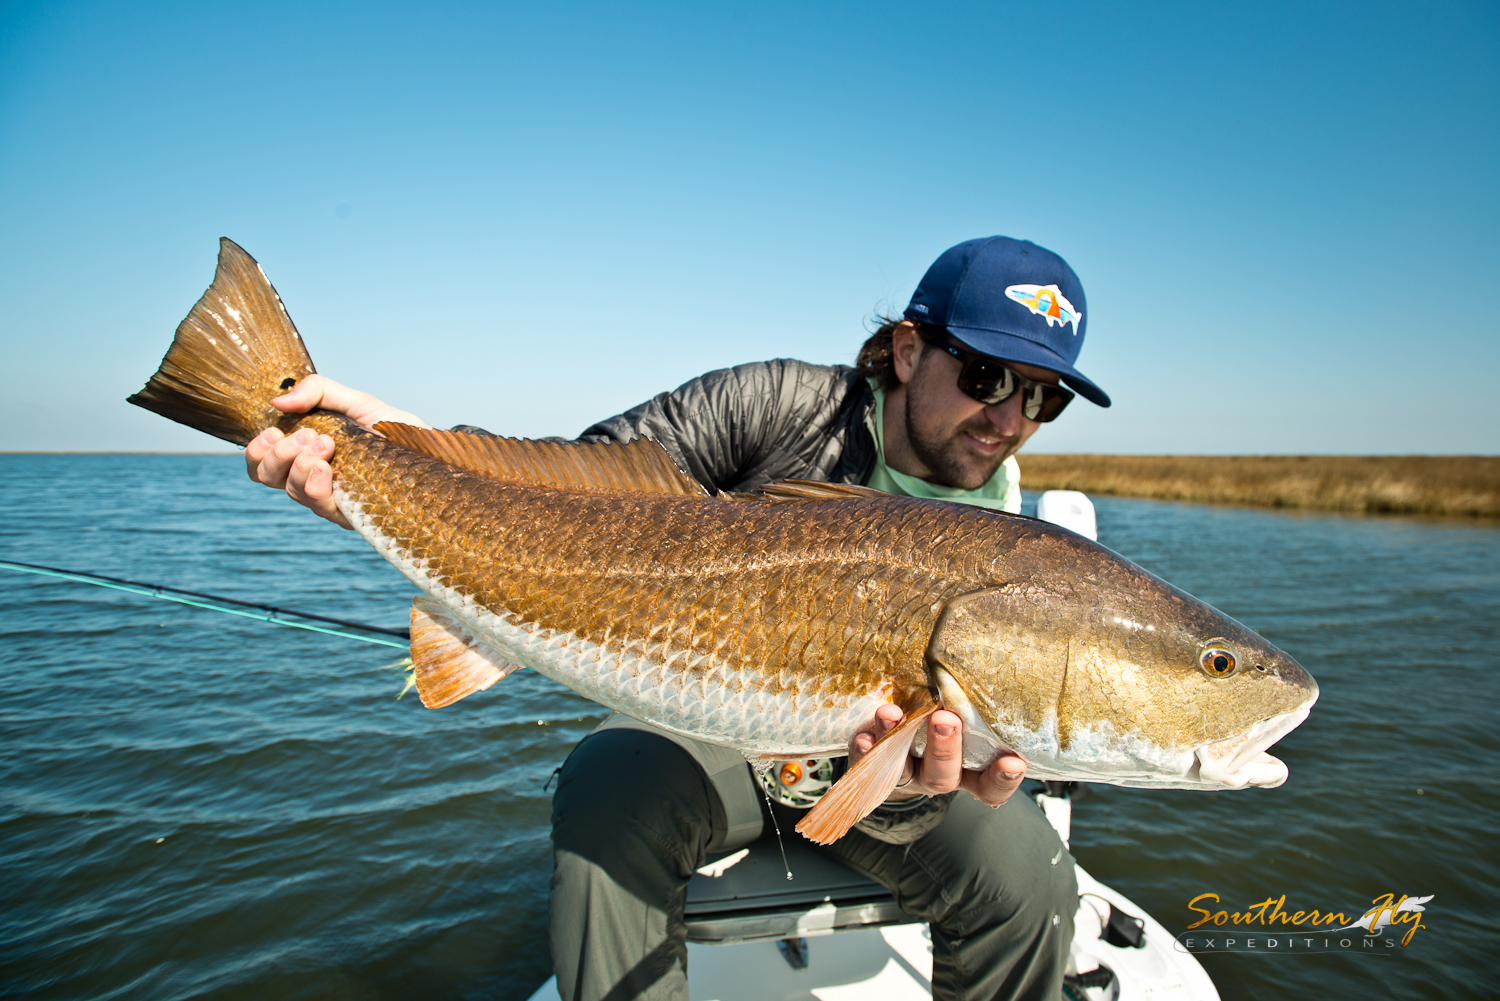 Louisiana Redfish Guide Southern Fly Expeditions